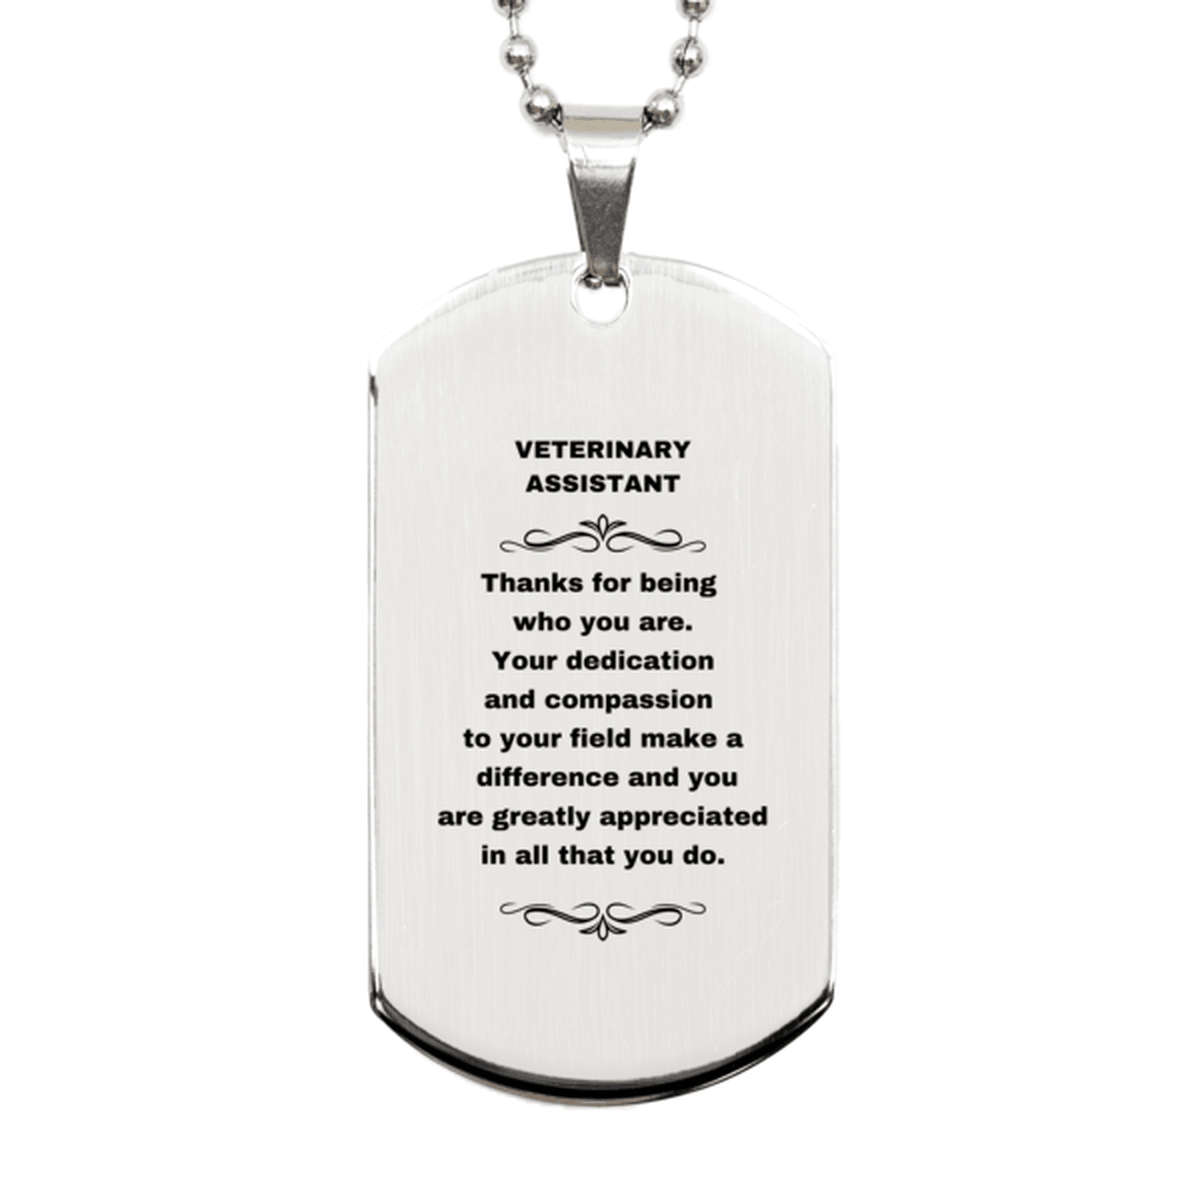 Veterinary Assistant Silver Engraved Dog Tag Necklace - Thanks for being who you are - Birthday Christmas Jewelry Gifts Coworkers Colleague Boss - Mallard Moon Gift Shop